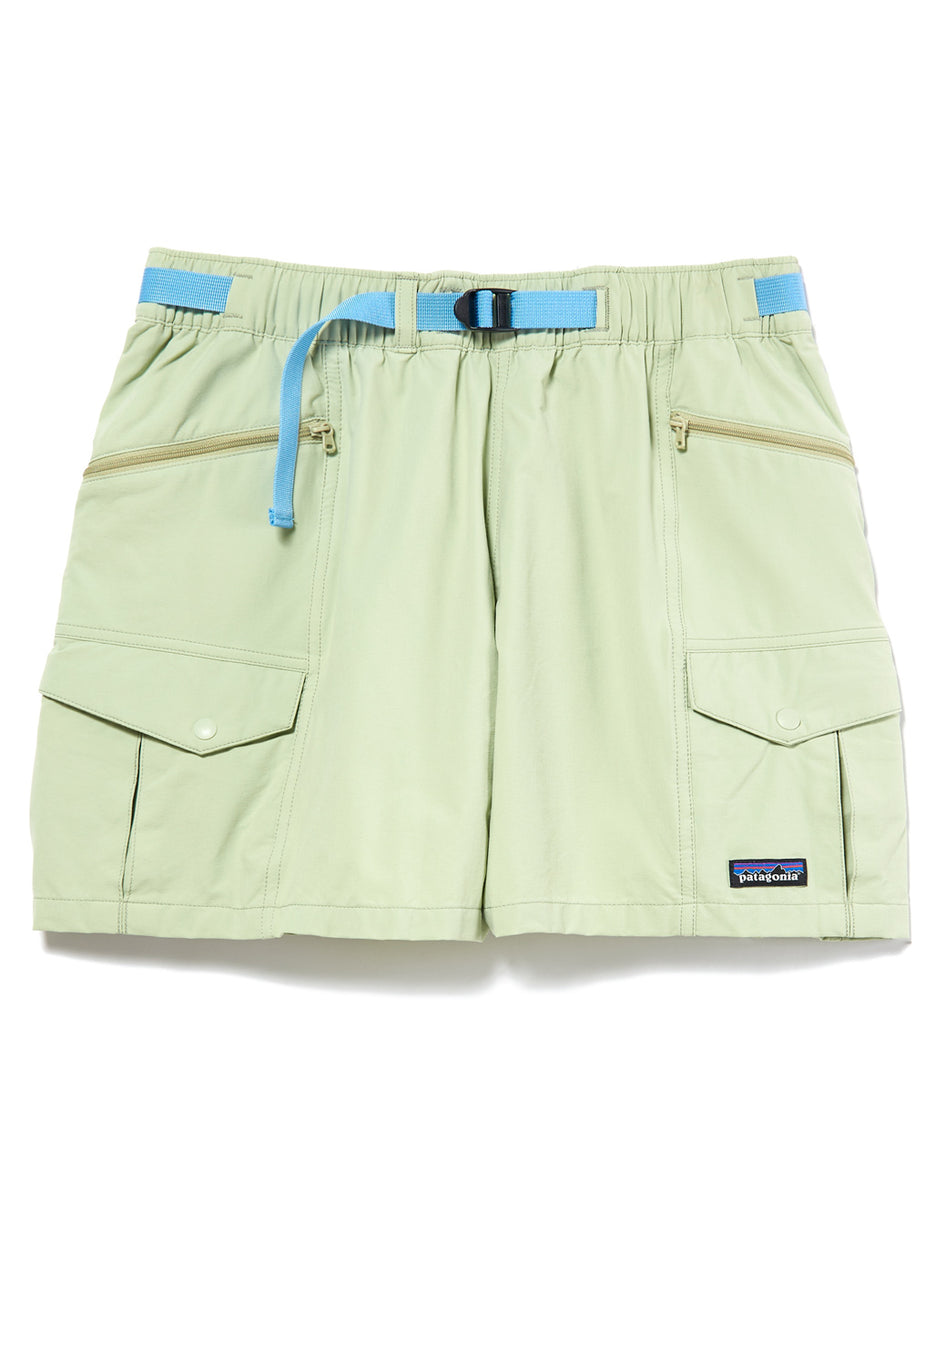 Patagonia Women's Outdoor Everyday Shorts 3